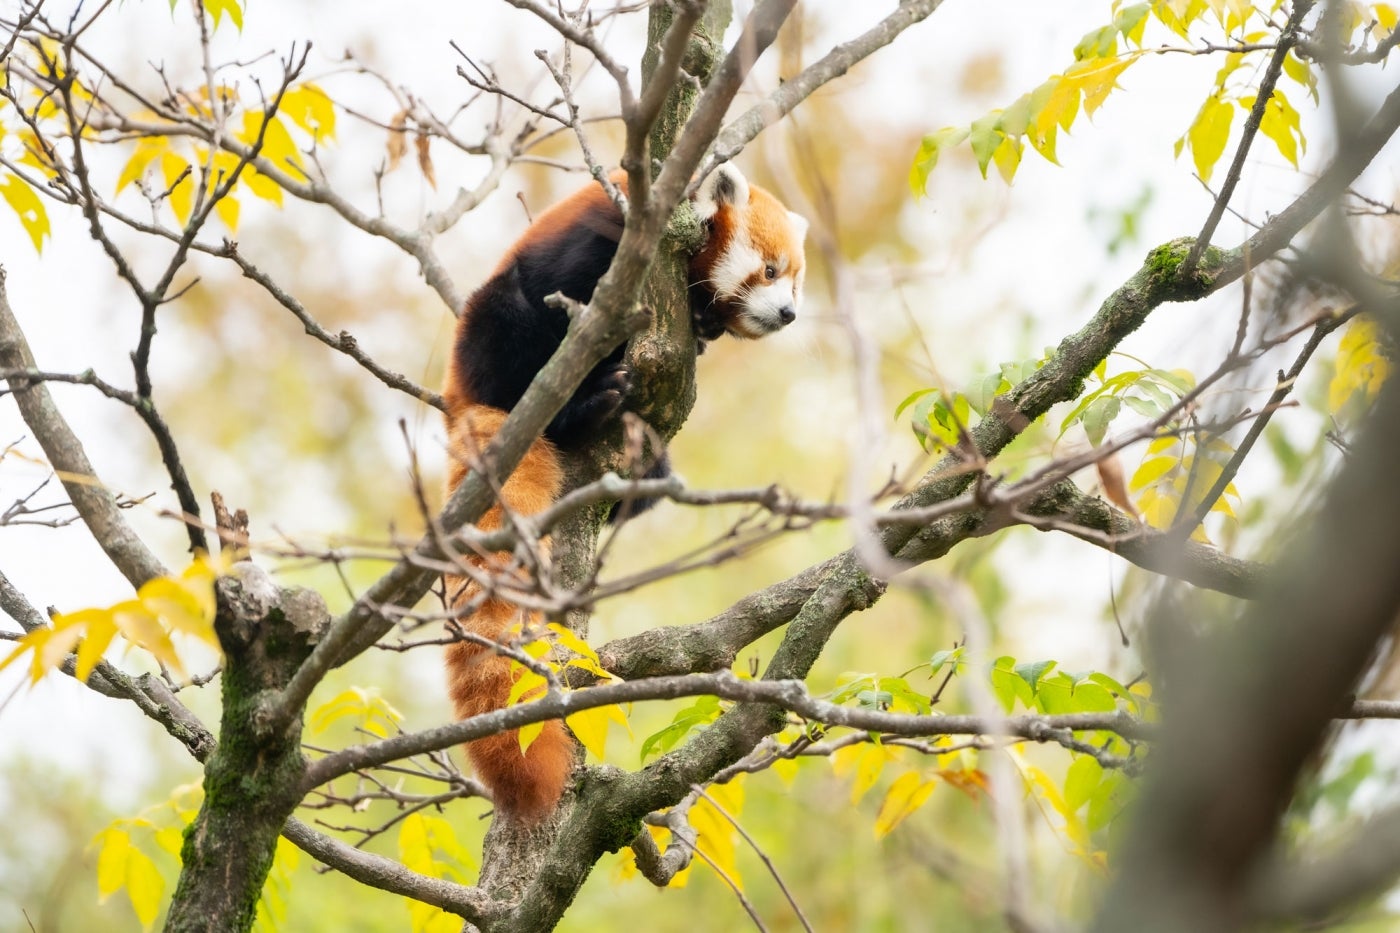 A red panda with a small body, long,bushy tail, clawed feet, whiskers and pointed ears climbing on branches high up in a tree.